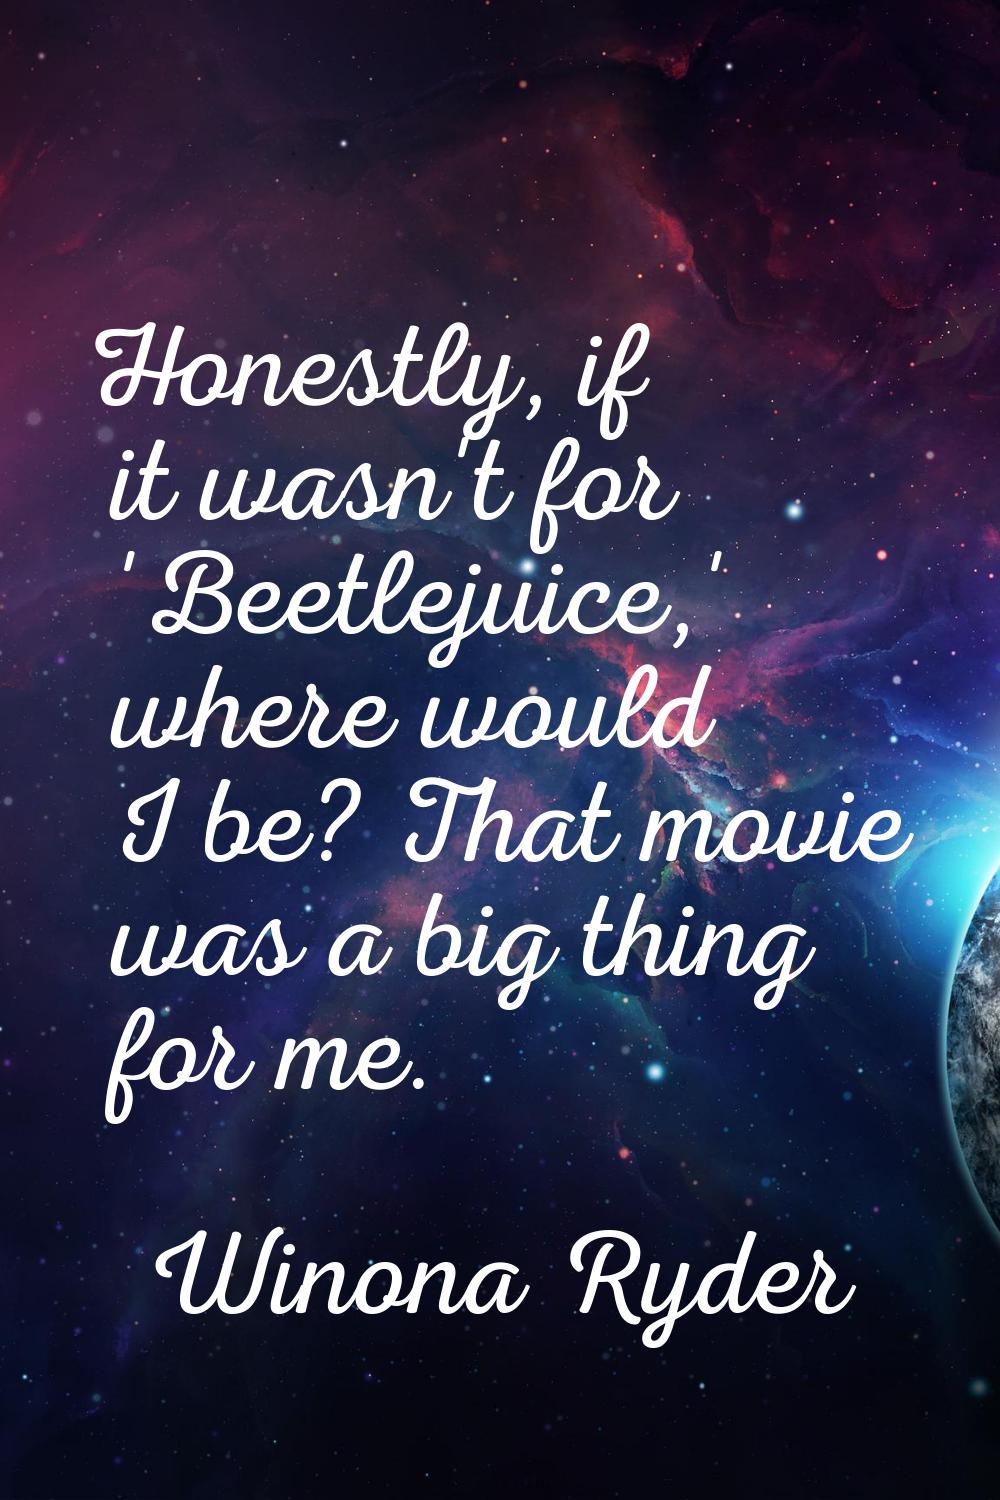 Honestly, if it wasn't for 'Beetlejuice,' where would I be? That movie was a big thing for me.